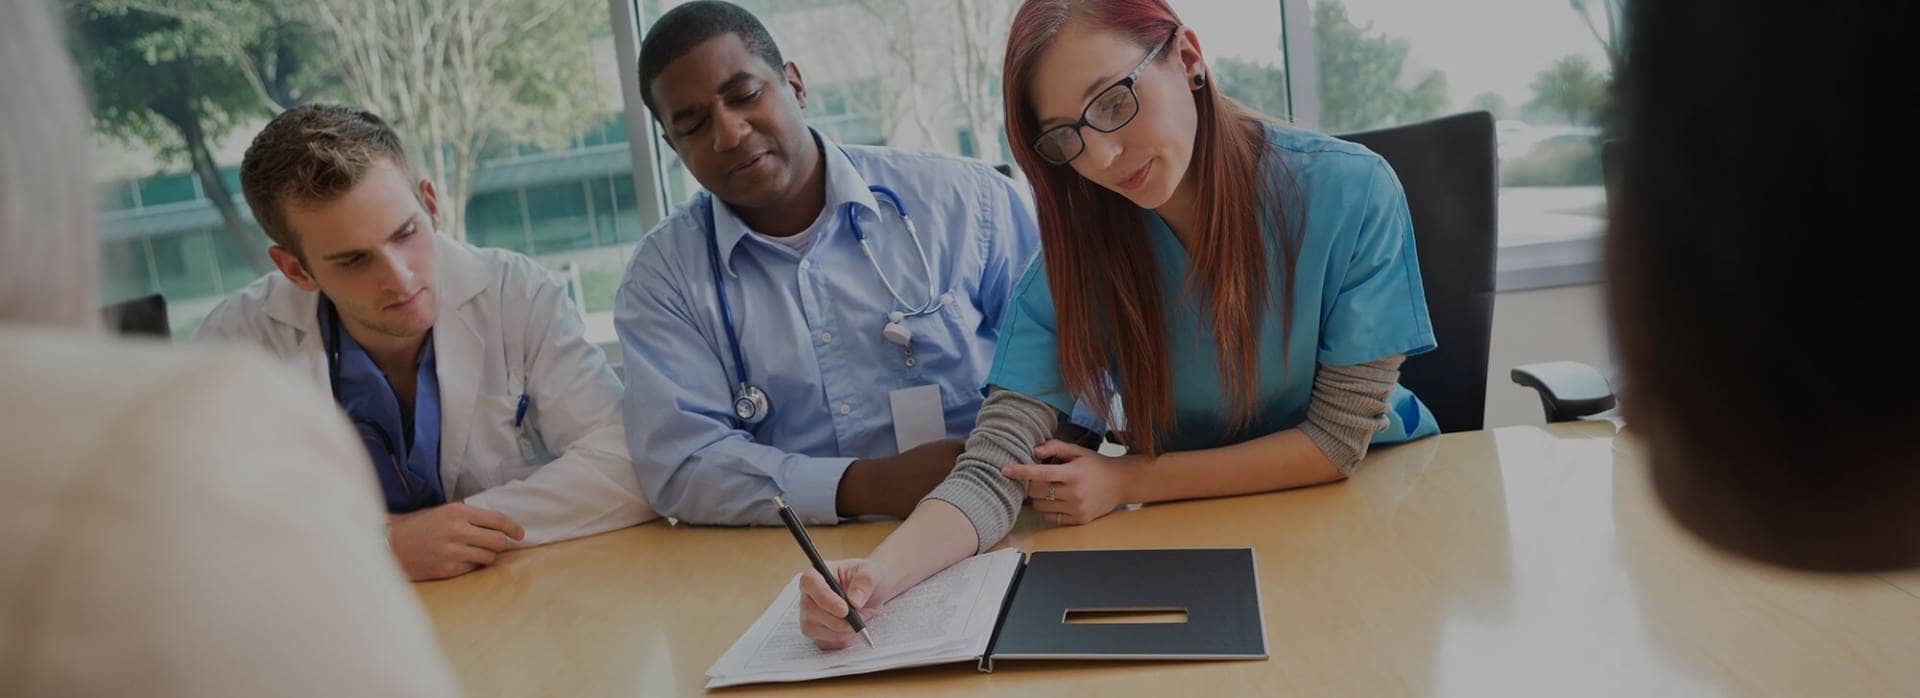 Tuition: Health Care Policy & Regulation Graduate Certificate